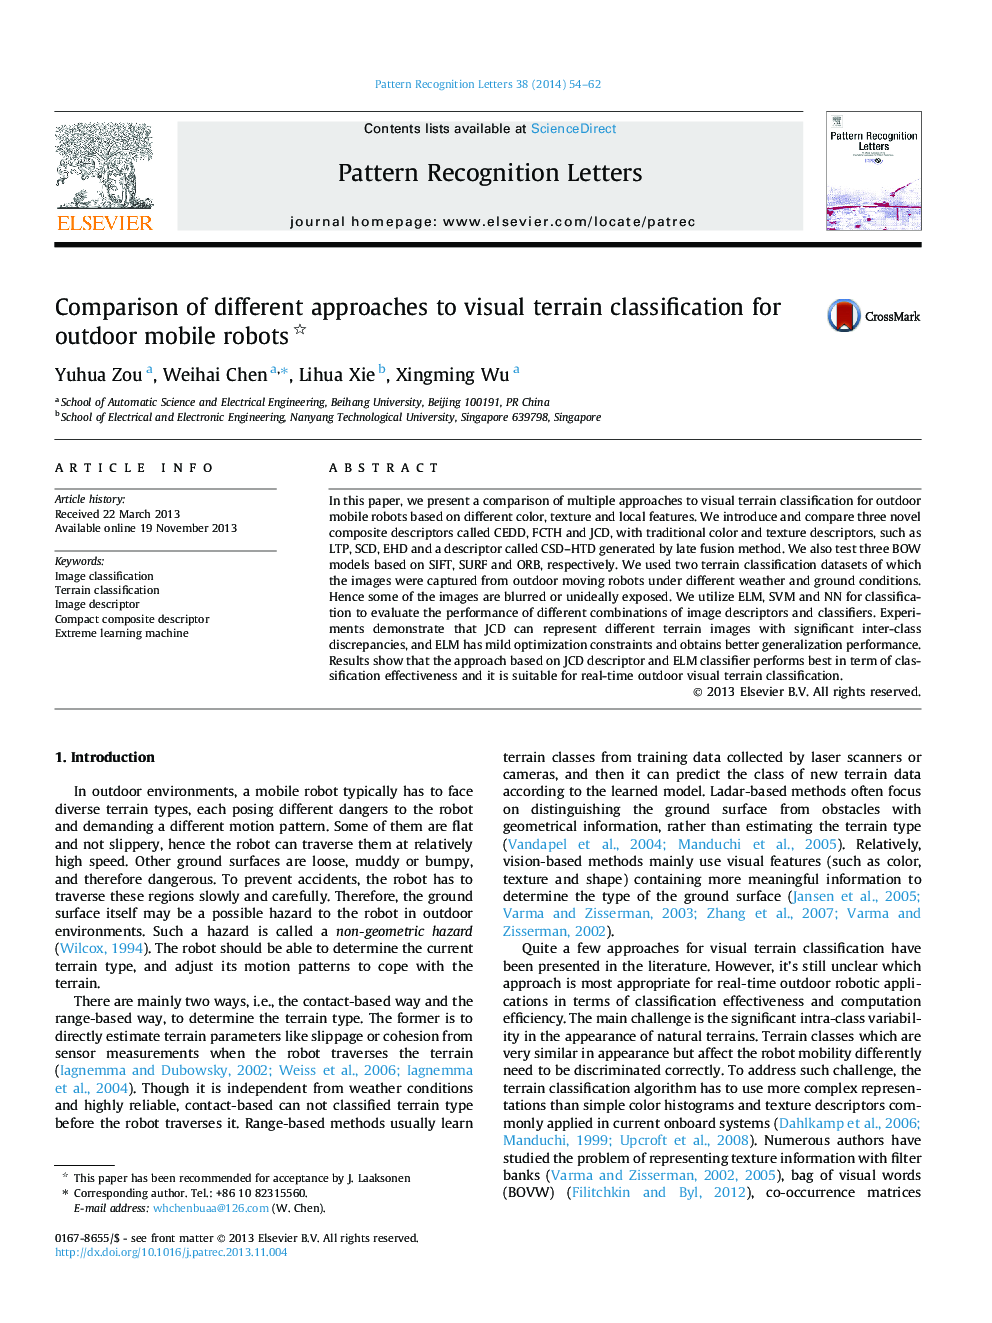 Comparison of different approaches to visual terrain classification for outdoor mobile robots 